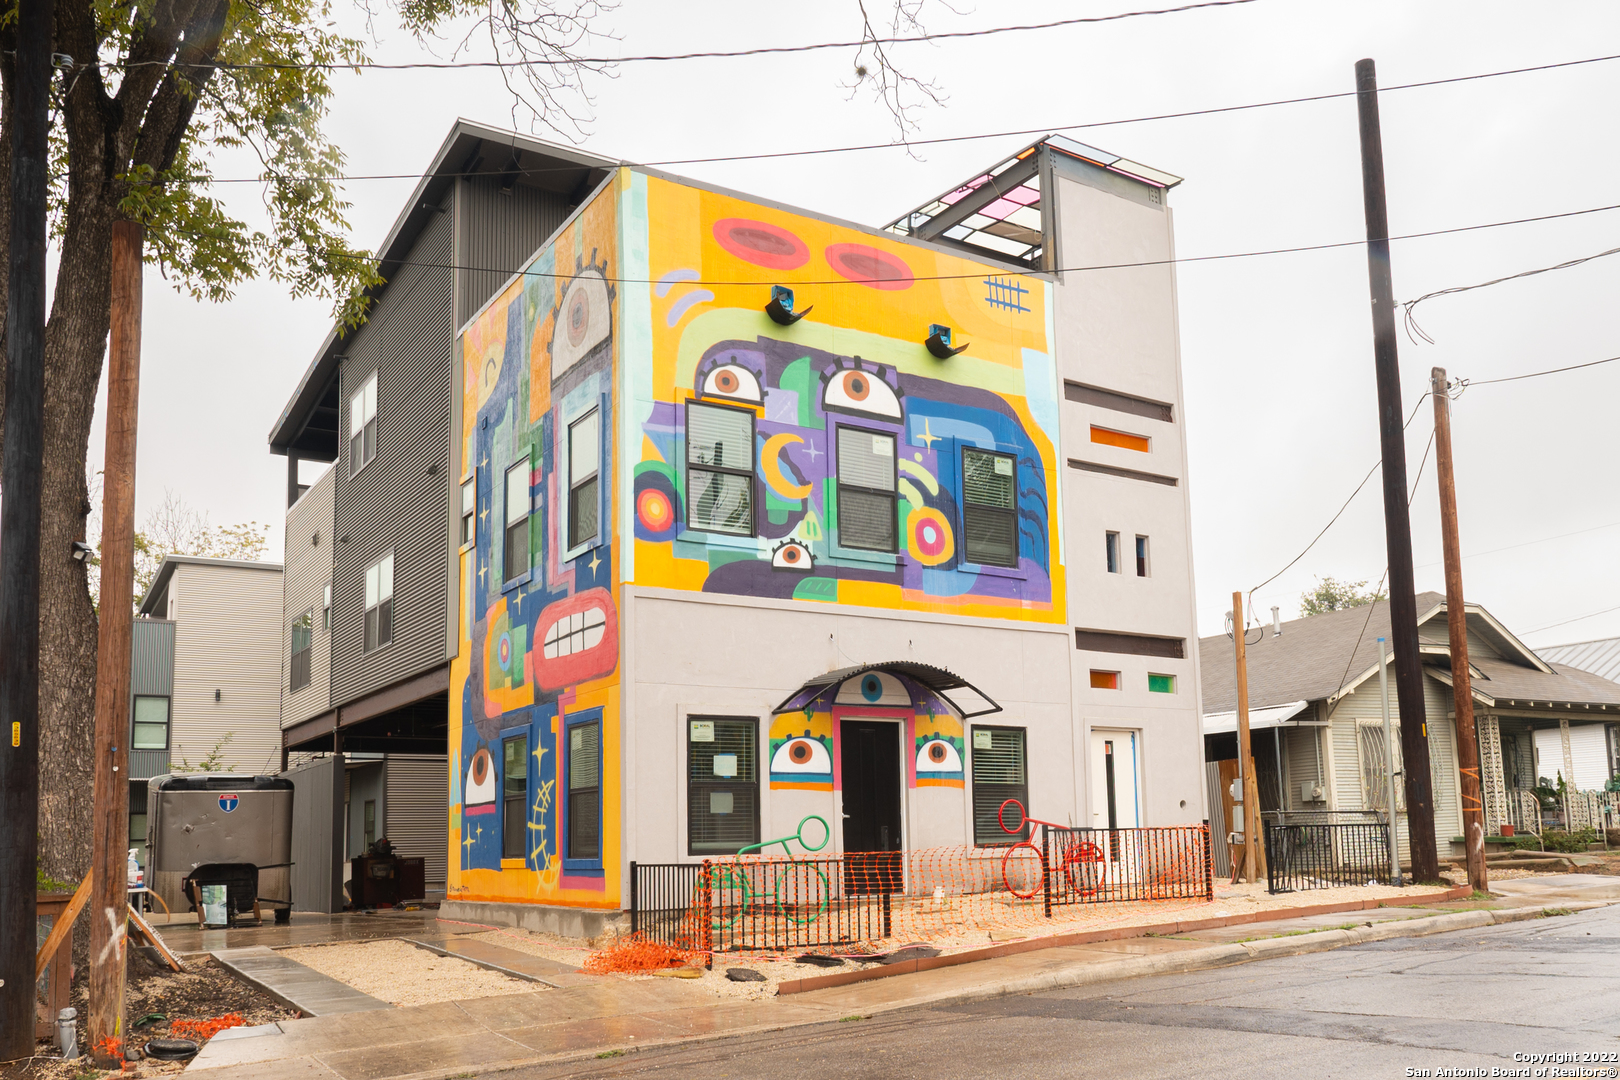 THE BOHEME, ITS NAME SAYS IT ALL, THIS IS A UNIQUE PIECE OF ART WILL BLOW YOUR MIND!!  THE IDEA OF WORK+ LIVE+ NETWORK IS HERE. STARTING WITH THE AMAZING OUTSIDE WALL ART , DESIGNED BY MAURO DE LA TORRE A LOCAL SAN ANTONIO ARTIST, WHO INSPIRED US TO CREATE THIS COLORFUL MURALS TO ATTRACT THE COMMUNITY. THIS TOWNHOME OFFERS YOU A VARIETY OF FUNCTIONS IN ONE, THIS PROPERTY IS INTENDED TO ATRACT PEOPLE WHO ARE TIRED OF LEASING AN OFFICE SPACE AND AN APARTMENT, YOU HAVE BOTH IN ONE WITH THIS UNITS.    THIS STUNNING NEW CONSTRUCTION IS LOCATED AT THE SECOND FLOOR OF BOHEME, WITH A OPEN SPACE CONCEPT, CONCRETE FLOORING TROUGHOUT THE ENTIRE AREA, AMAZING KITCHEN SPACE, PRIVATE  HIGH CEILINGS BEDROOM AND COMPLETE FULL BATH, WITH A LUXURY VANITY WHICH FEATURES DIGITAL MIRROR, OFFERS COVERED PARKING SPACES, AND PRIVATE STORAGE SPACES. ALL UNITS CAN RESERVE AND USE THE ROOF TOP/ MEDIA AREA FOR PRIVATE EVENTS. THE LOCATION AND VIEWS OF THIS PLACE ARE JUST ICONIC. ALL OUTDOORS AREAS OFFER A COMMON NETWORKING AREA AS WELL AS PRIVATE TERRACES WITH CITY VIEWS.    THE CONCEPT OF THIS TOWNHOME IS TO OFFER A SINGLE PRIVATE SPACE FOR EACH THREE FLOORS, MOSTLY REPRESENTED AS STUDIOS/ LOFTS. ALL FLOORS ARE SOLD/LEASED BY SEPARATETLY. COMMERCIAL NEEDS ARE WELCOME. ITS GREAT FOR INVESTORS, WHO LOOK TO AIRBNB, OR LEASE FOR COMMERCIAL NEEDS.